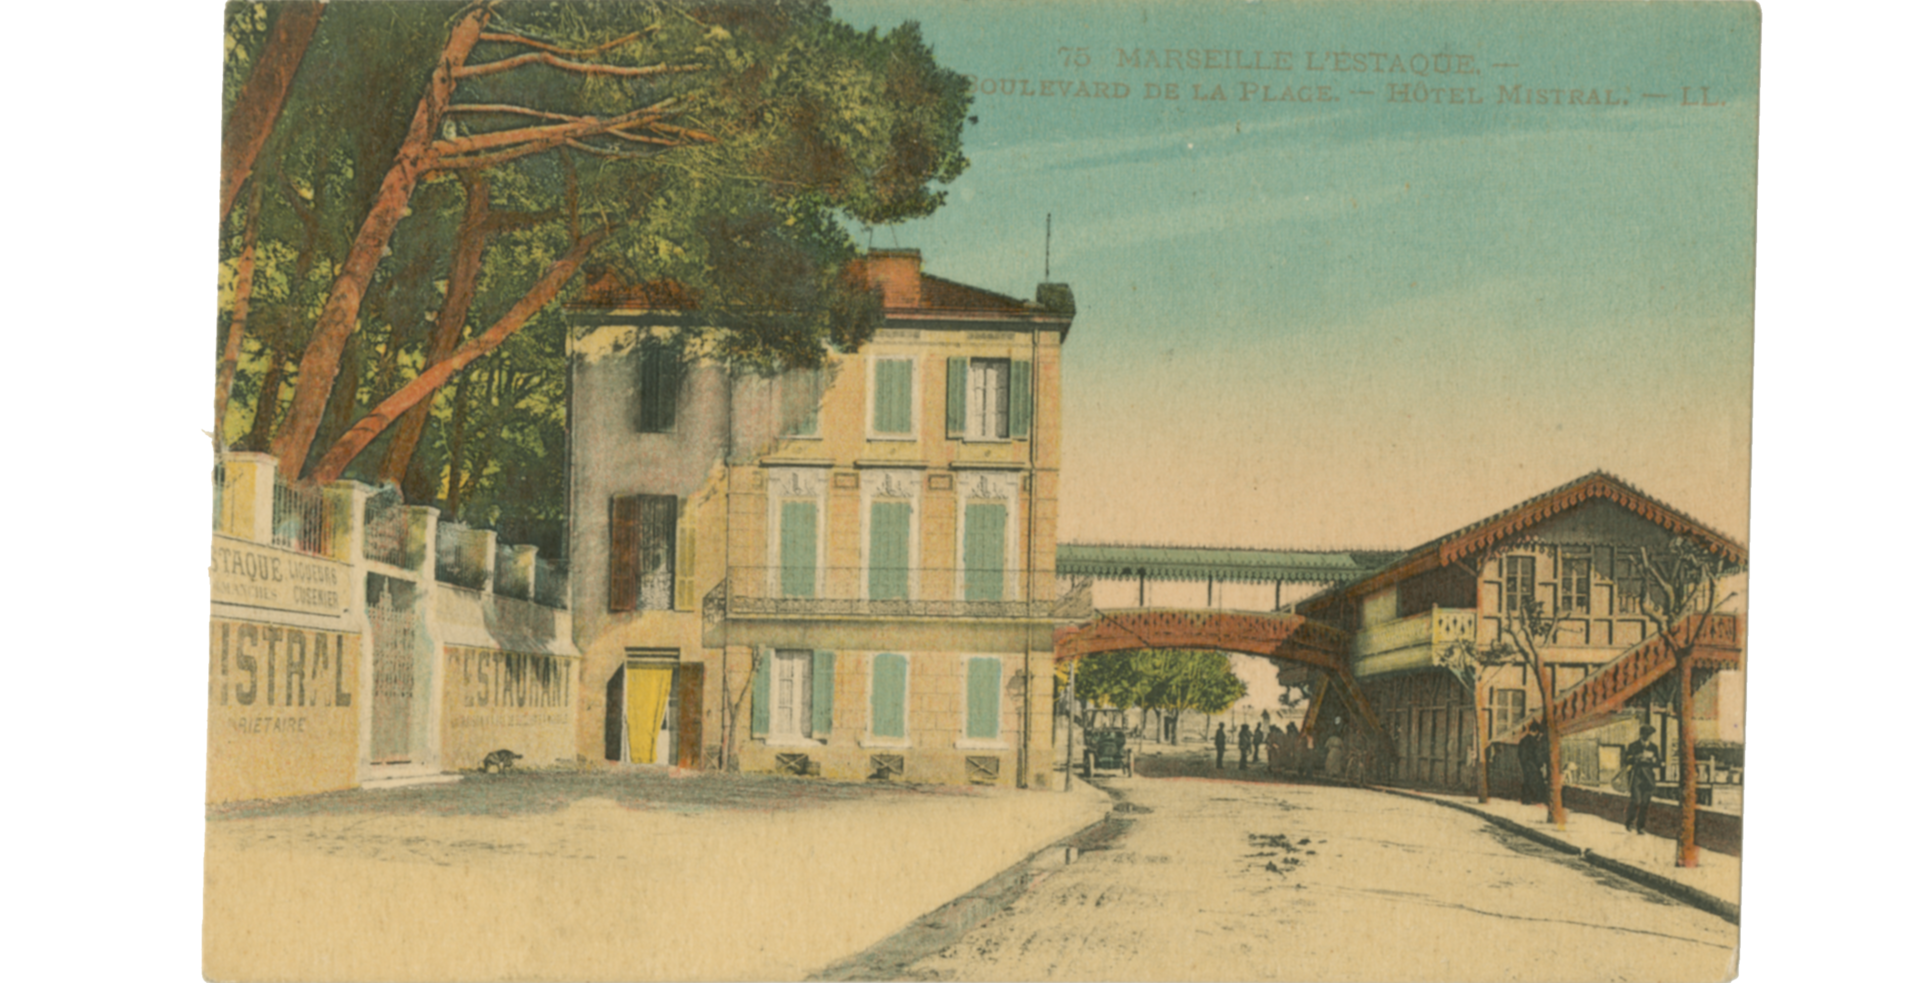 Drawn postcard of the Hôtel Mistral on a quiet street with many trees and and clear skies